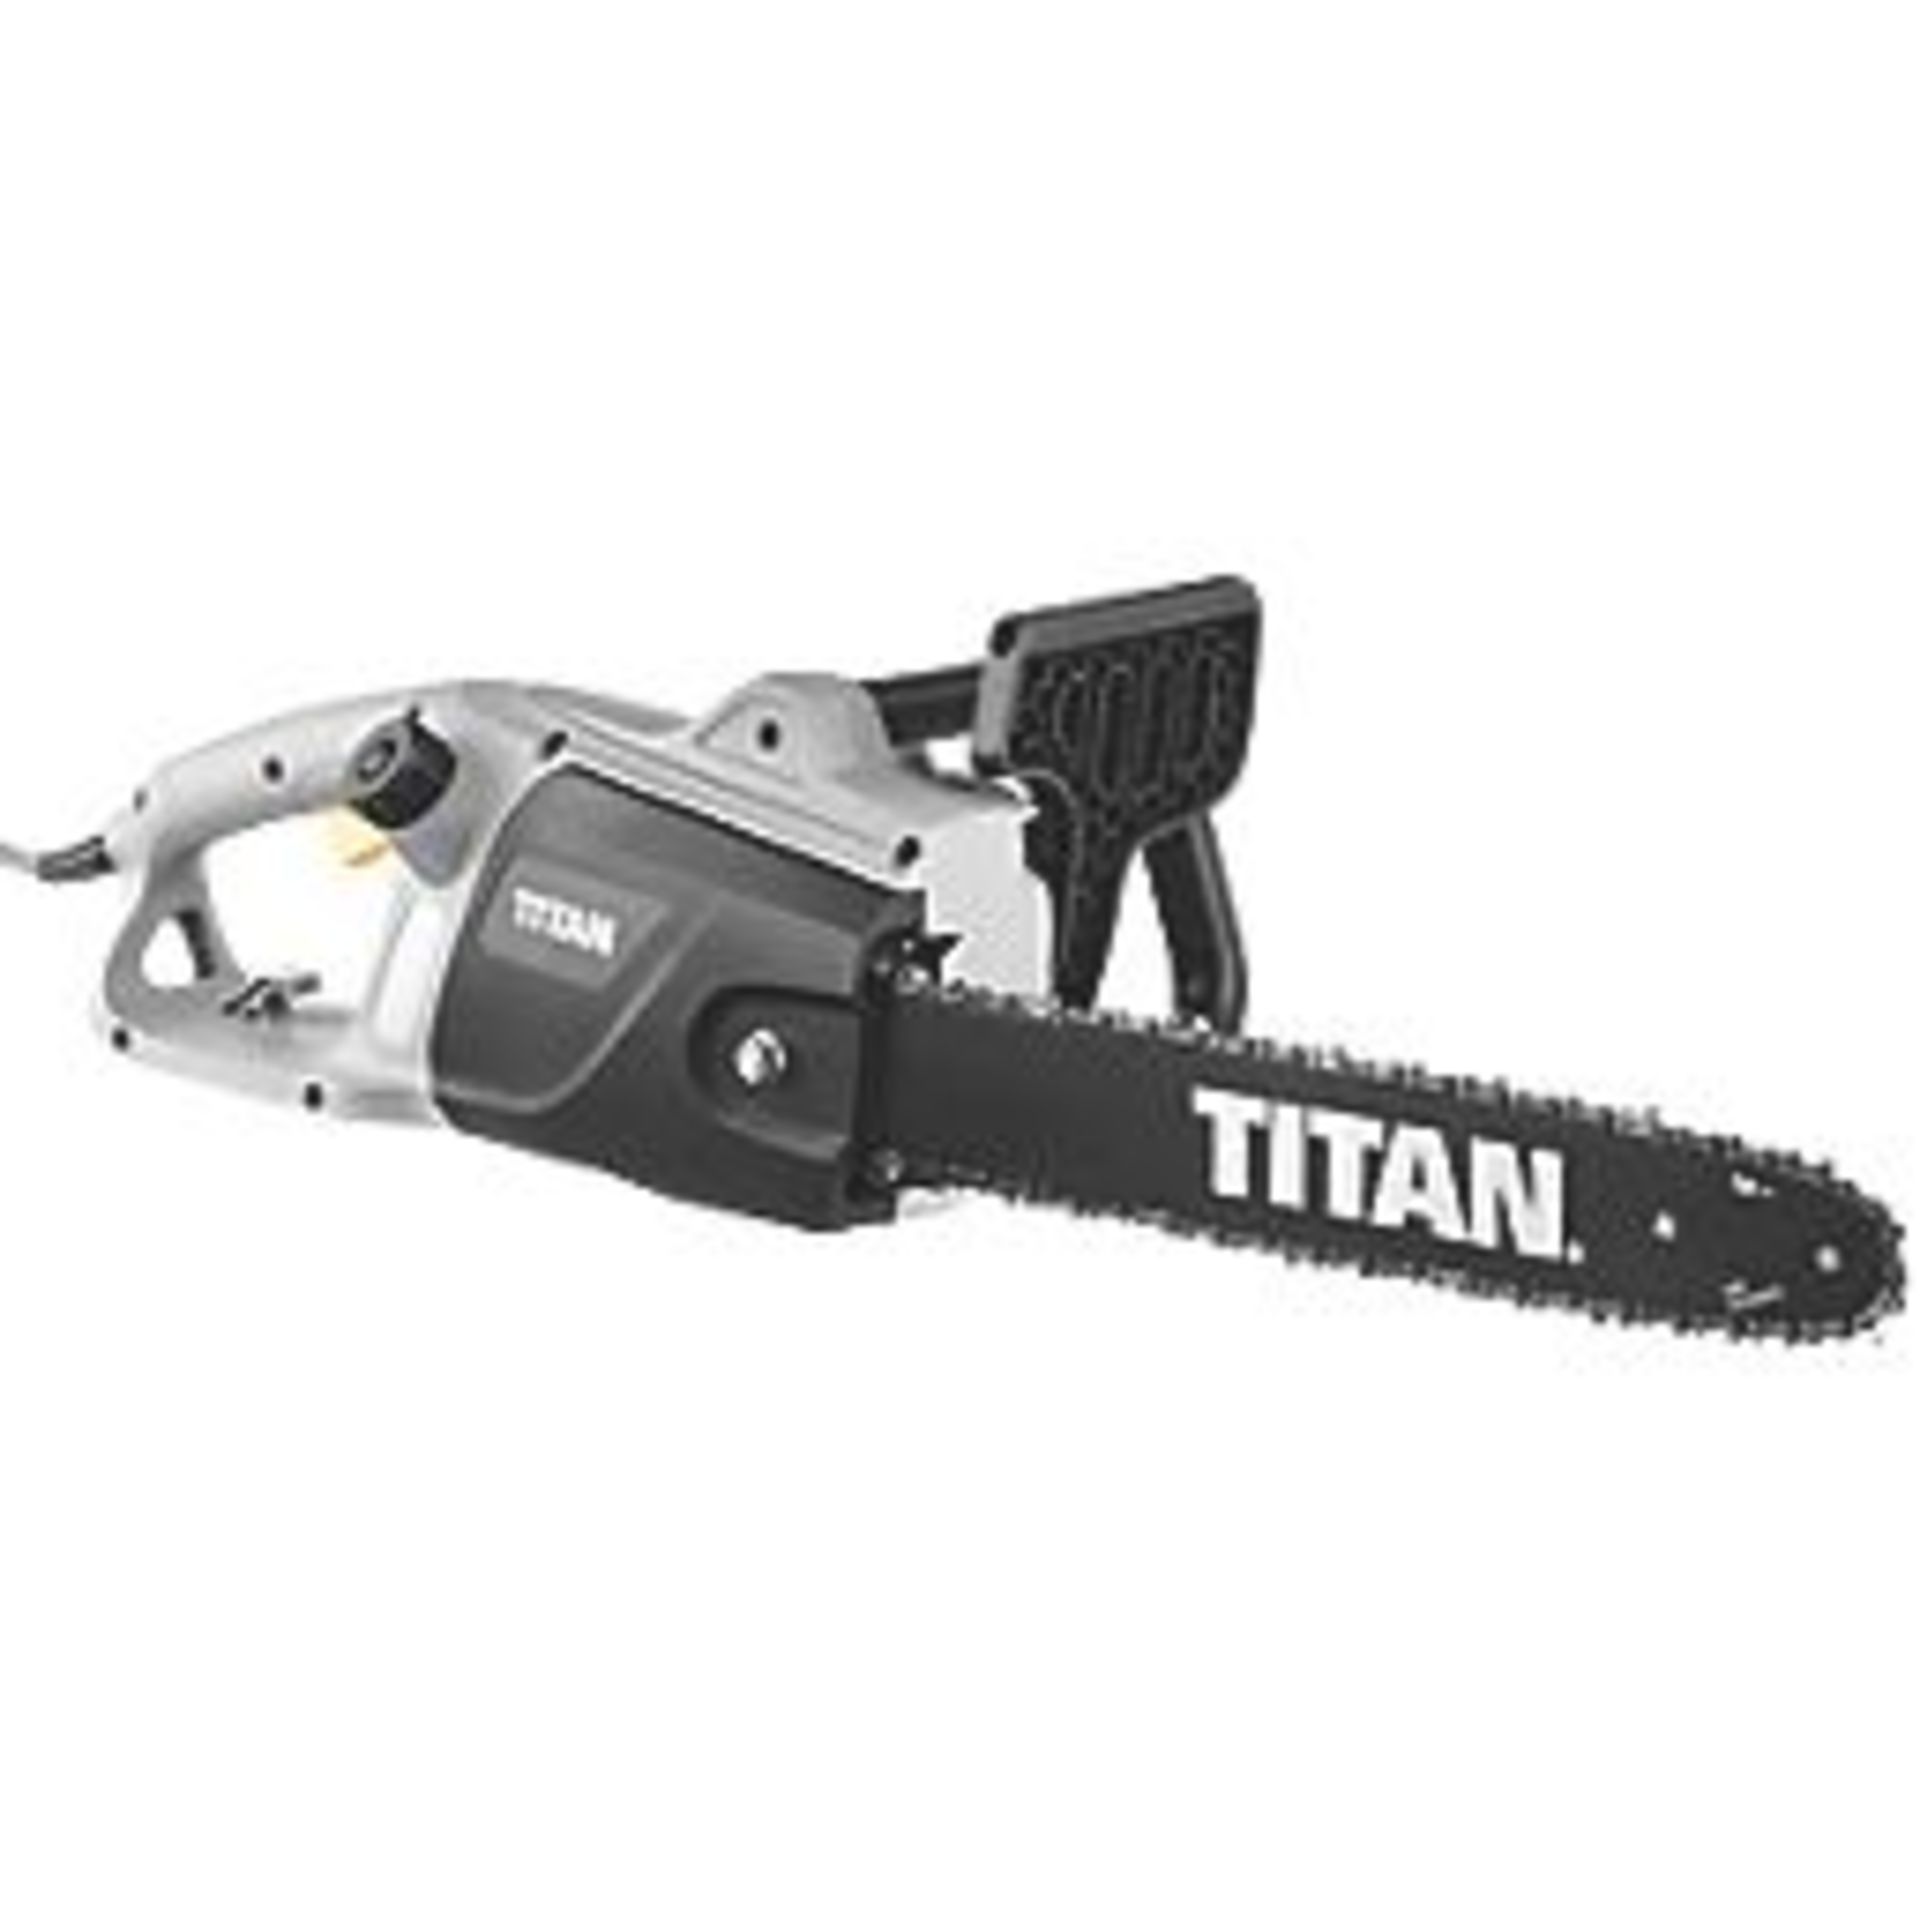 TITAN 2000W 230V ELECTRIC 40CM CHAINSAW. - ER42. Electric chainsaw with powerful motor and automatic